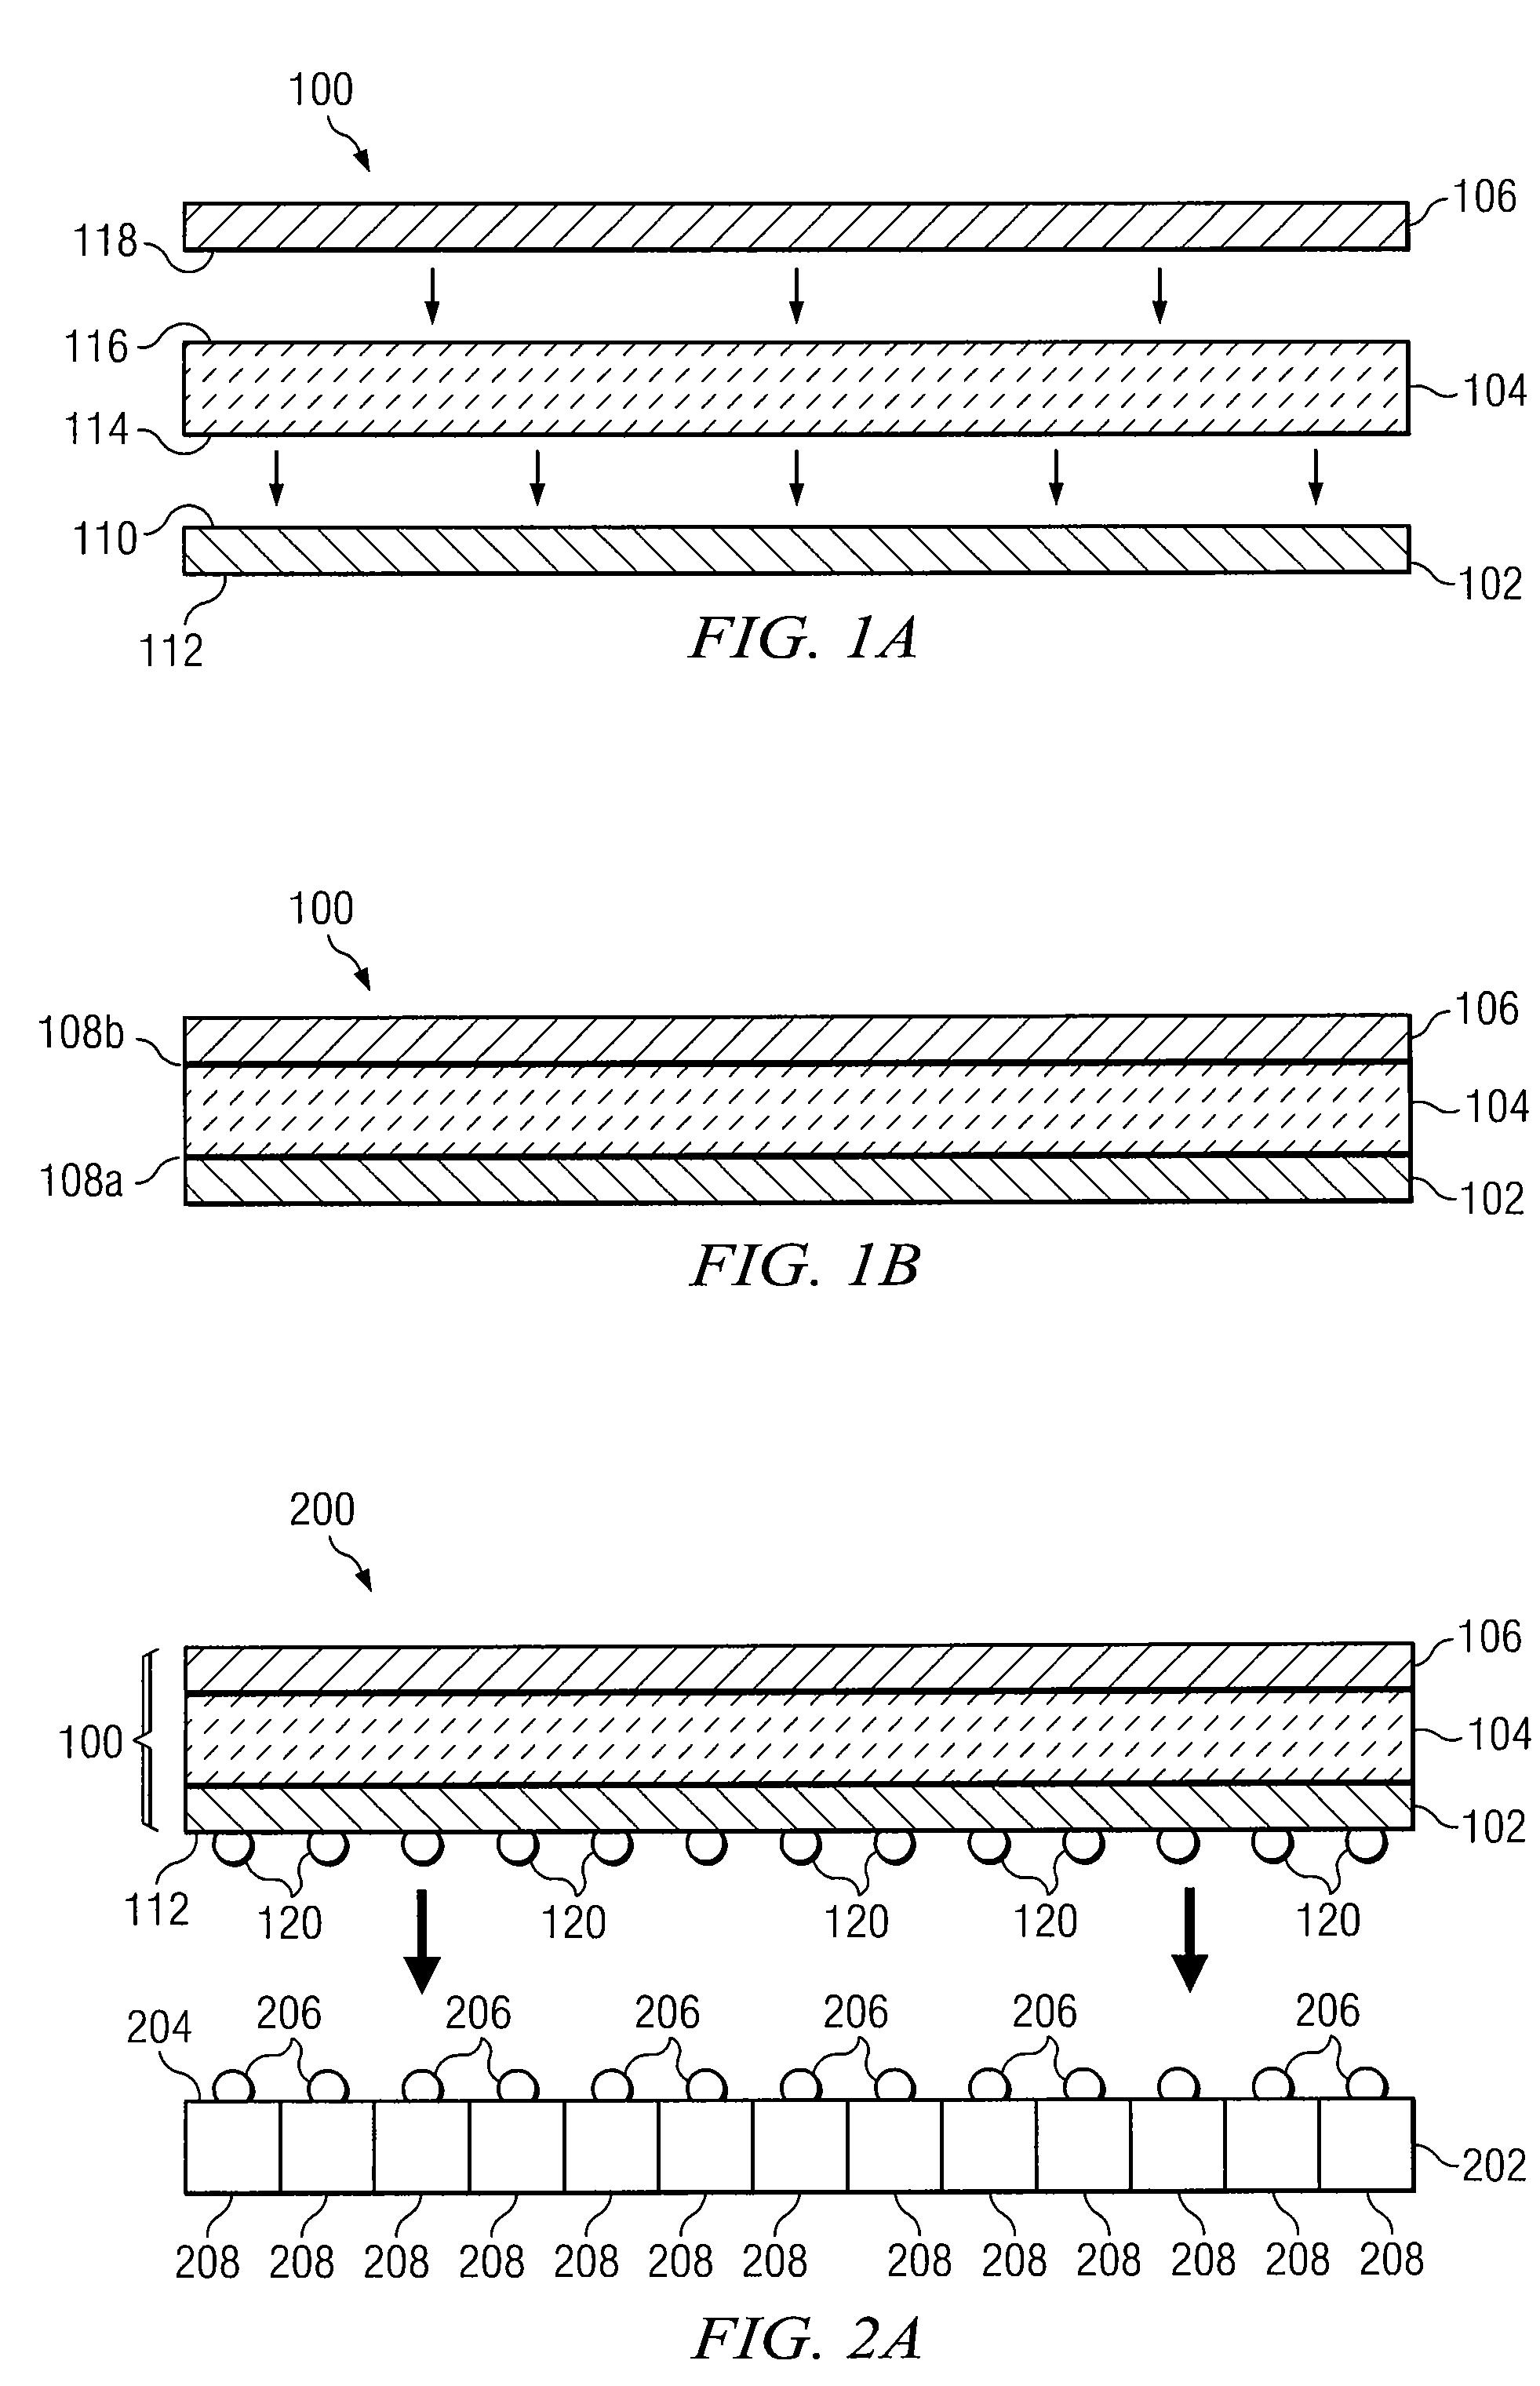 Composite Semiconductor Structure Formed Using Atomic Bonding and Adapted to Alter the Rate of Thermal Expansion of a Substrate